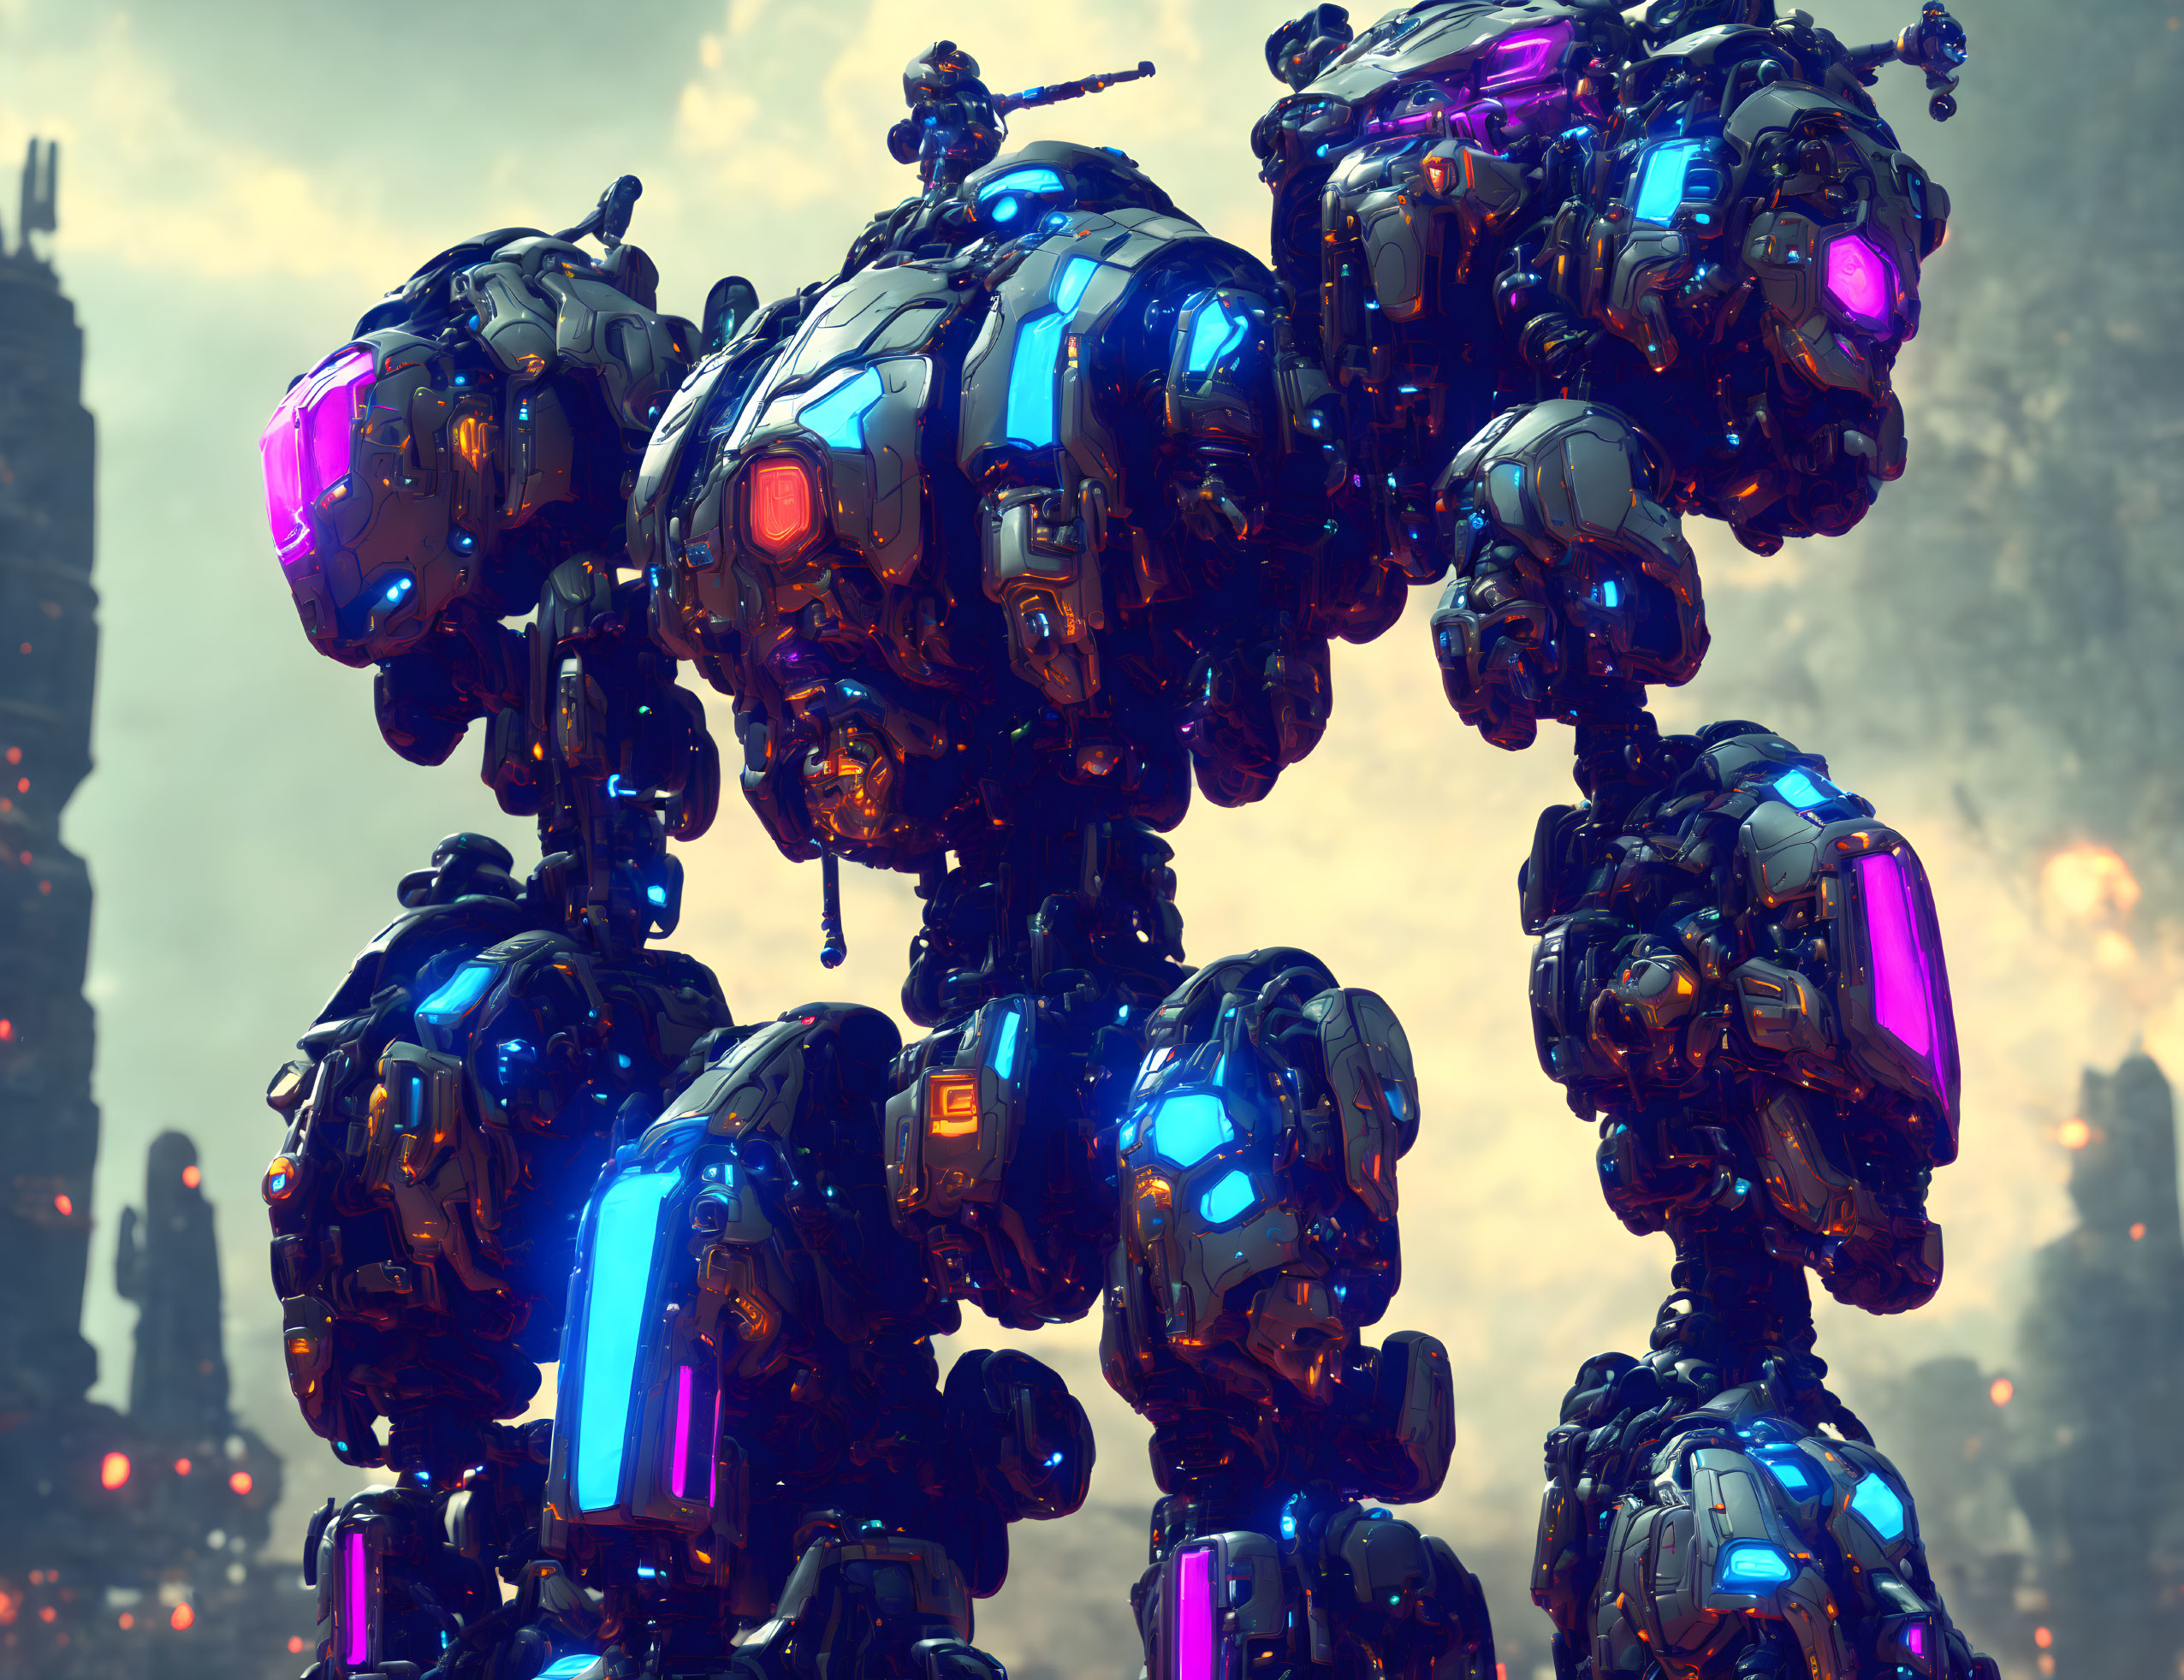 Futuristic robots with blue and purple illumination in smoky dystopian setting